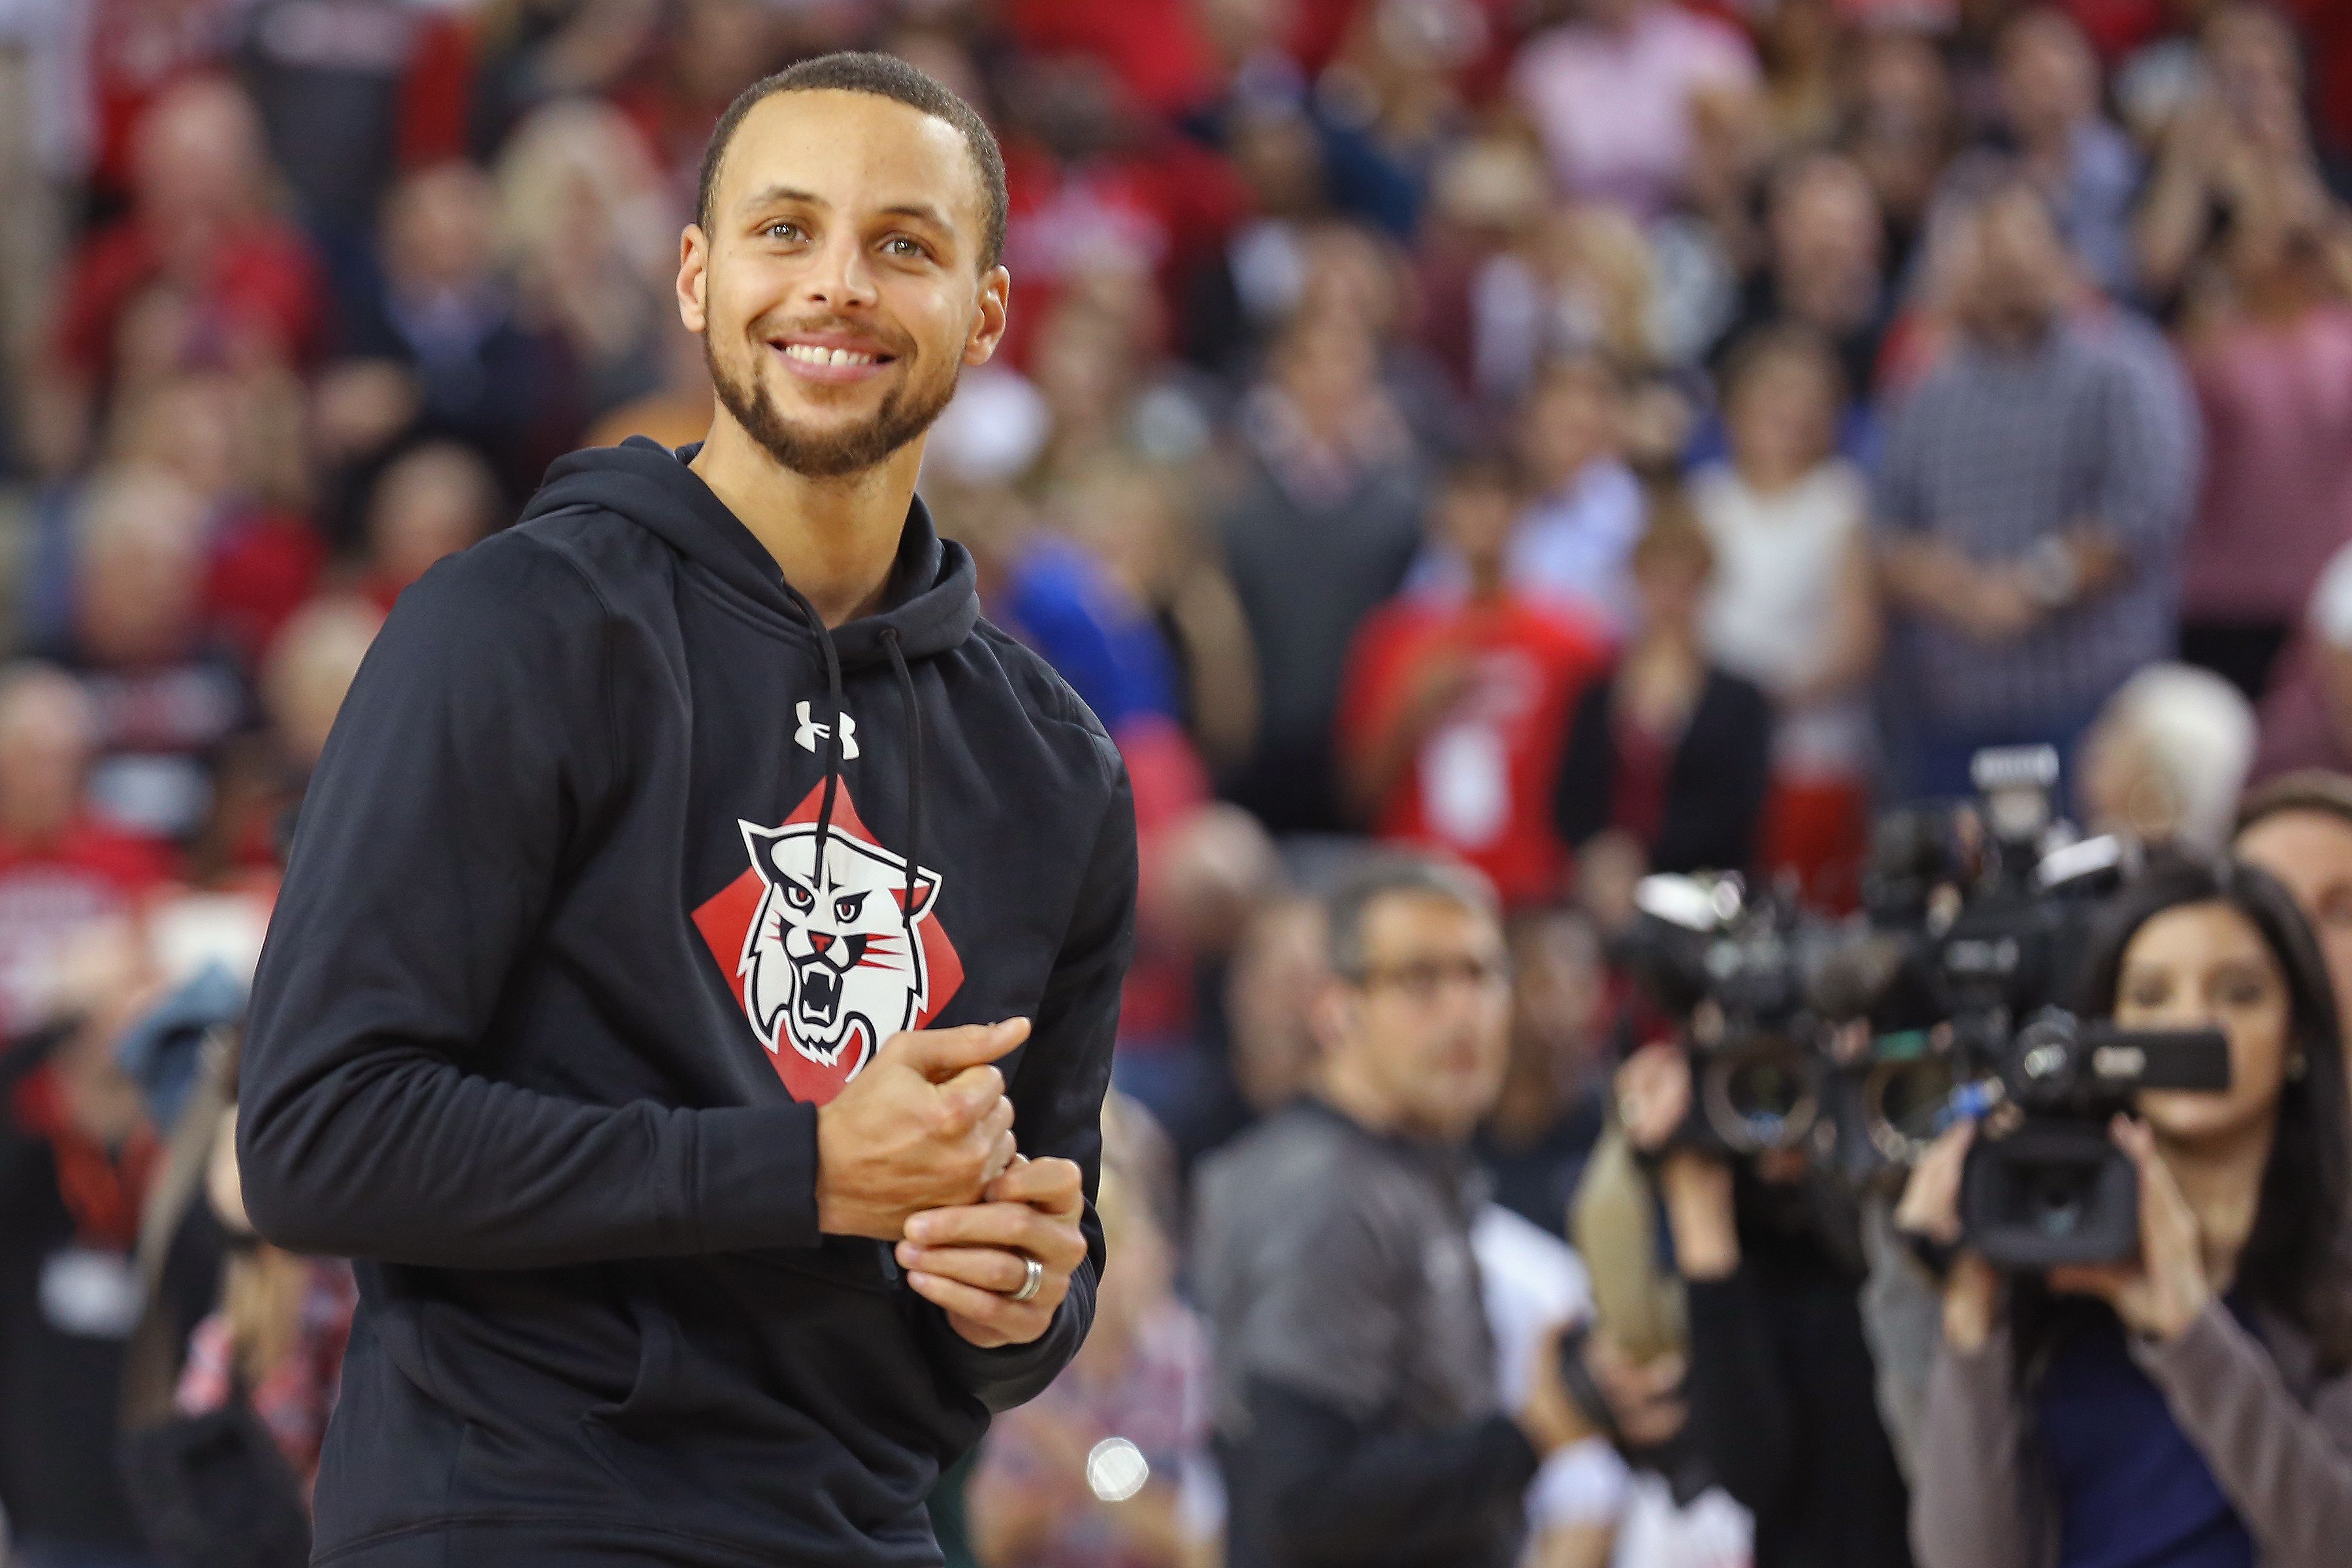 Thirteen Years After Entering NBA, Steph Curry Graduates with Class of 2022